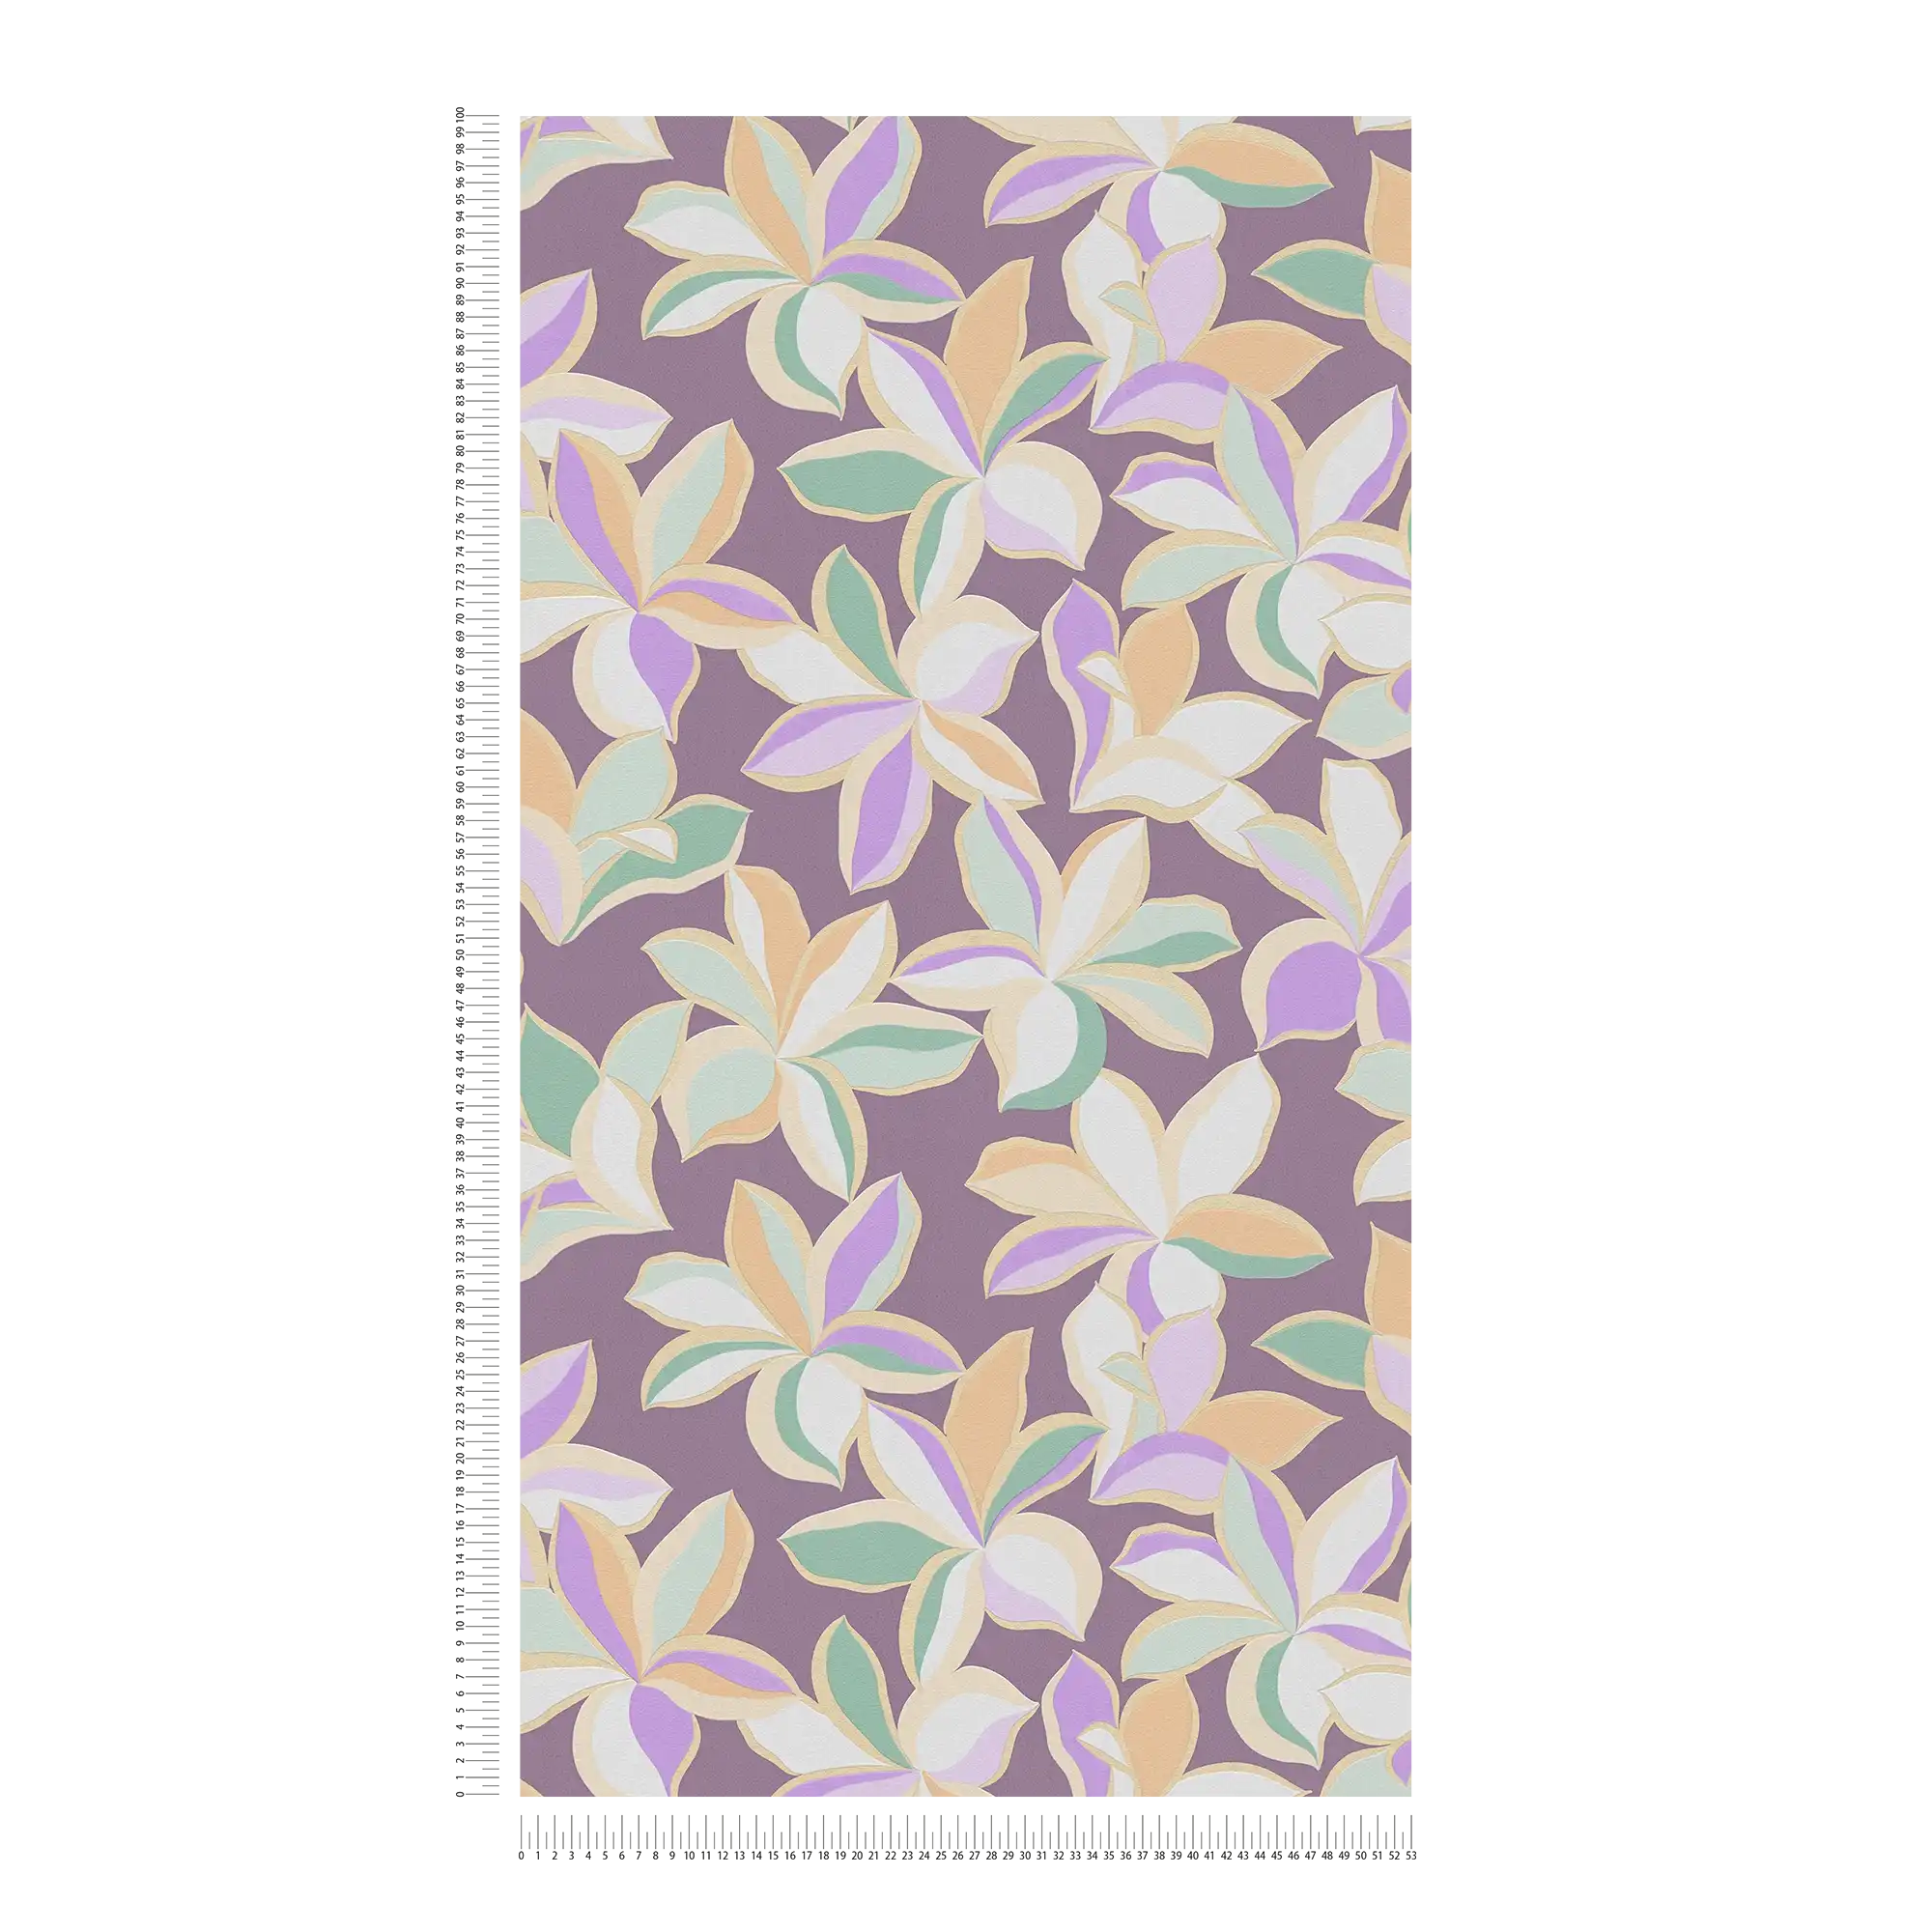             Floral wallpaper with shiny pattern - purple, gold, green
        